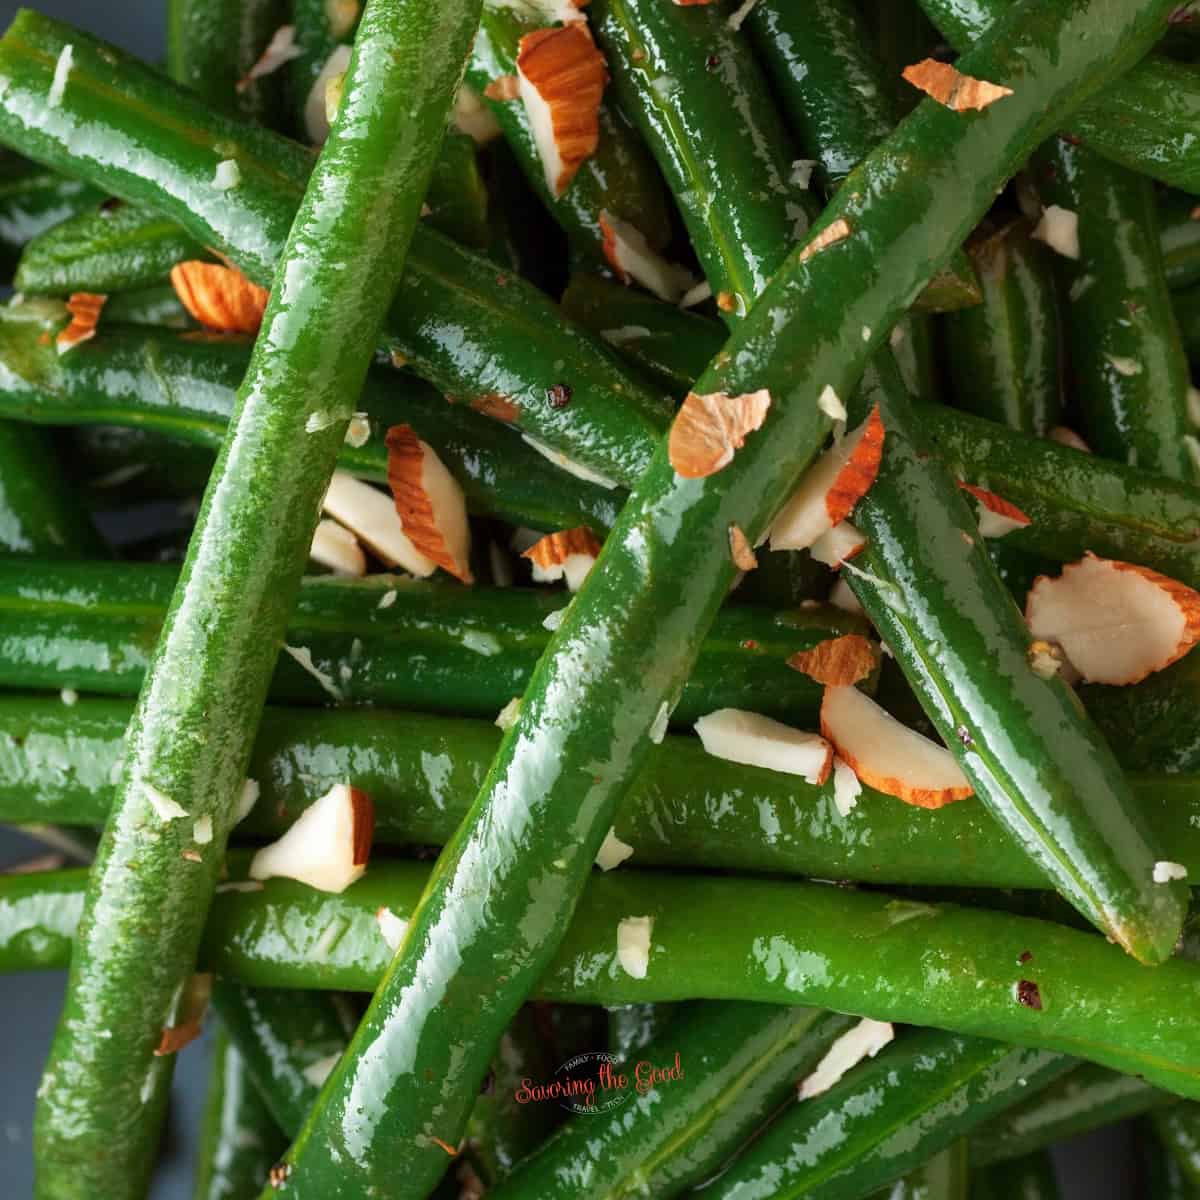 canned green beans with crumbled almonds, square image.